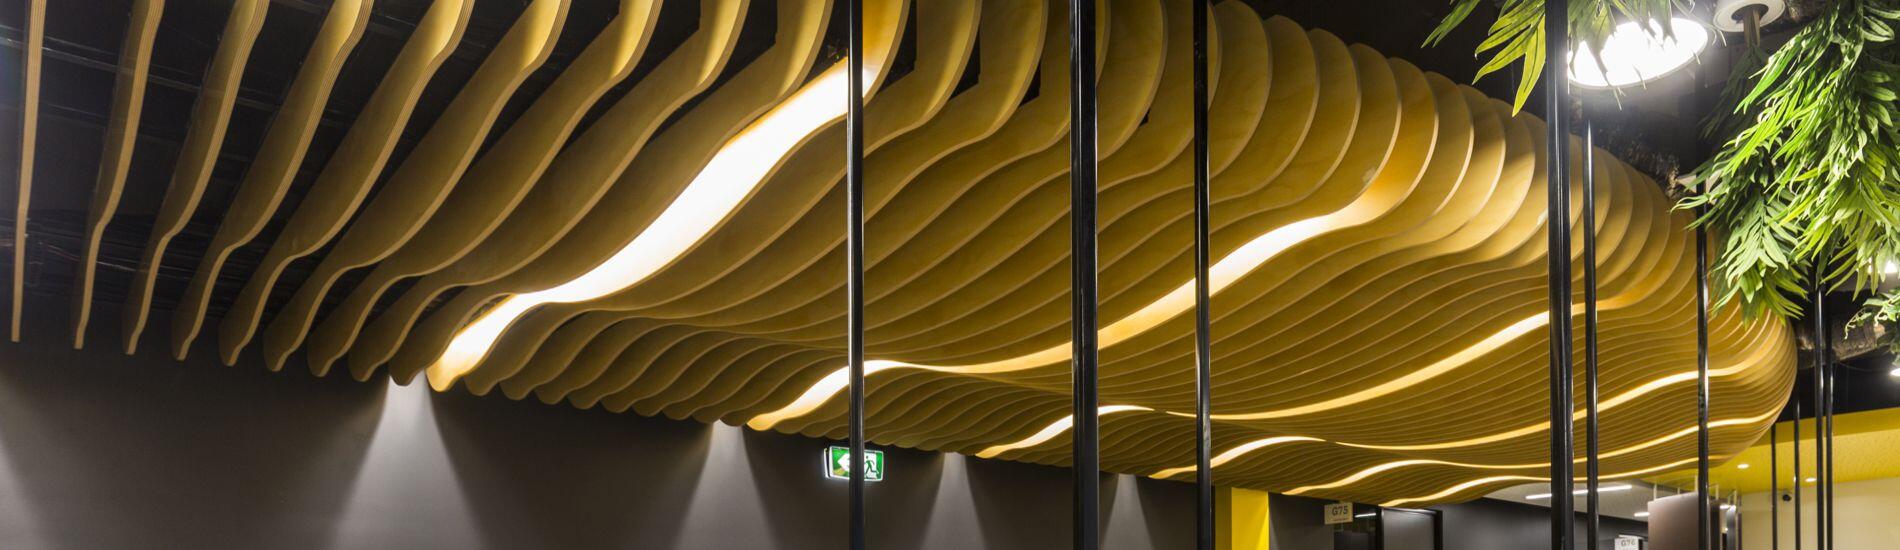 WAVE BLADES Ceiling Features and Decorative Screens Define Areas of Student Hub